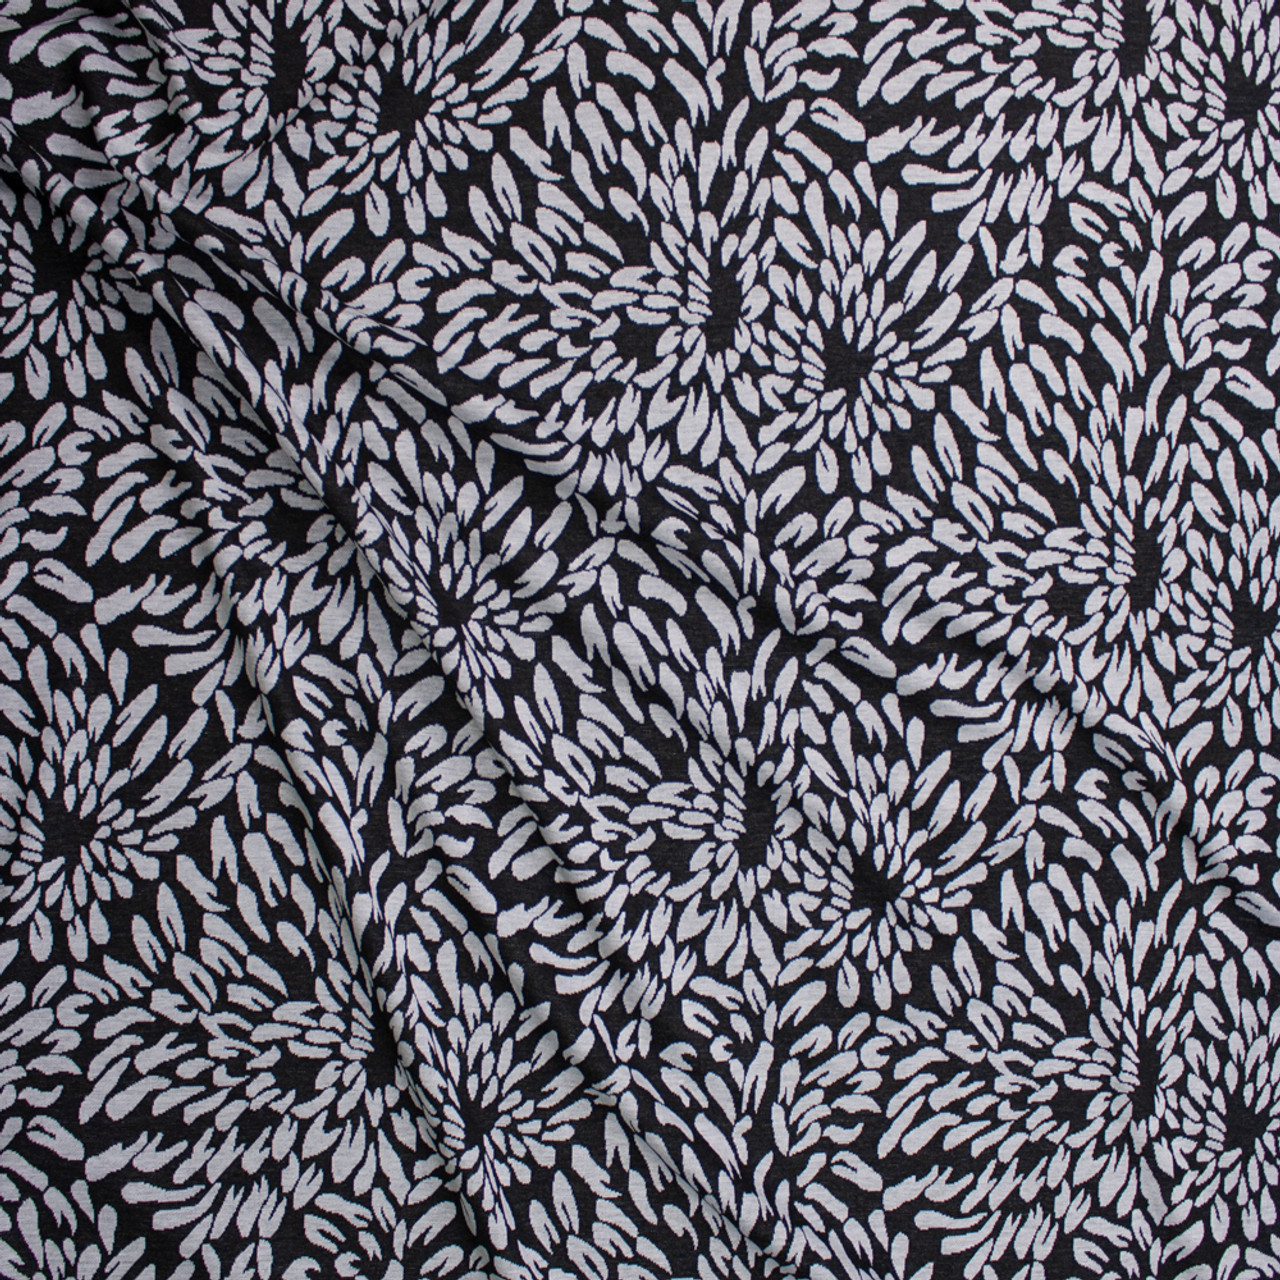 Cali Fabrics Grey and Black Mums Double Sweater Knit Fabric by the Yard